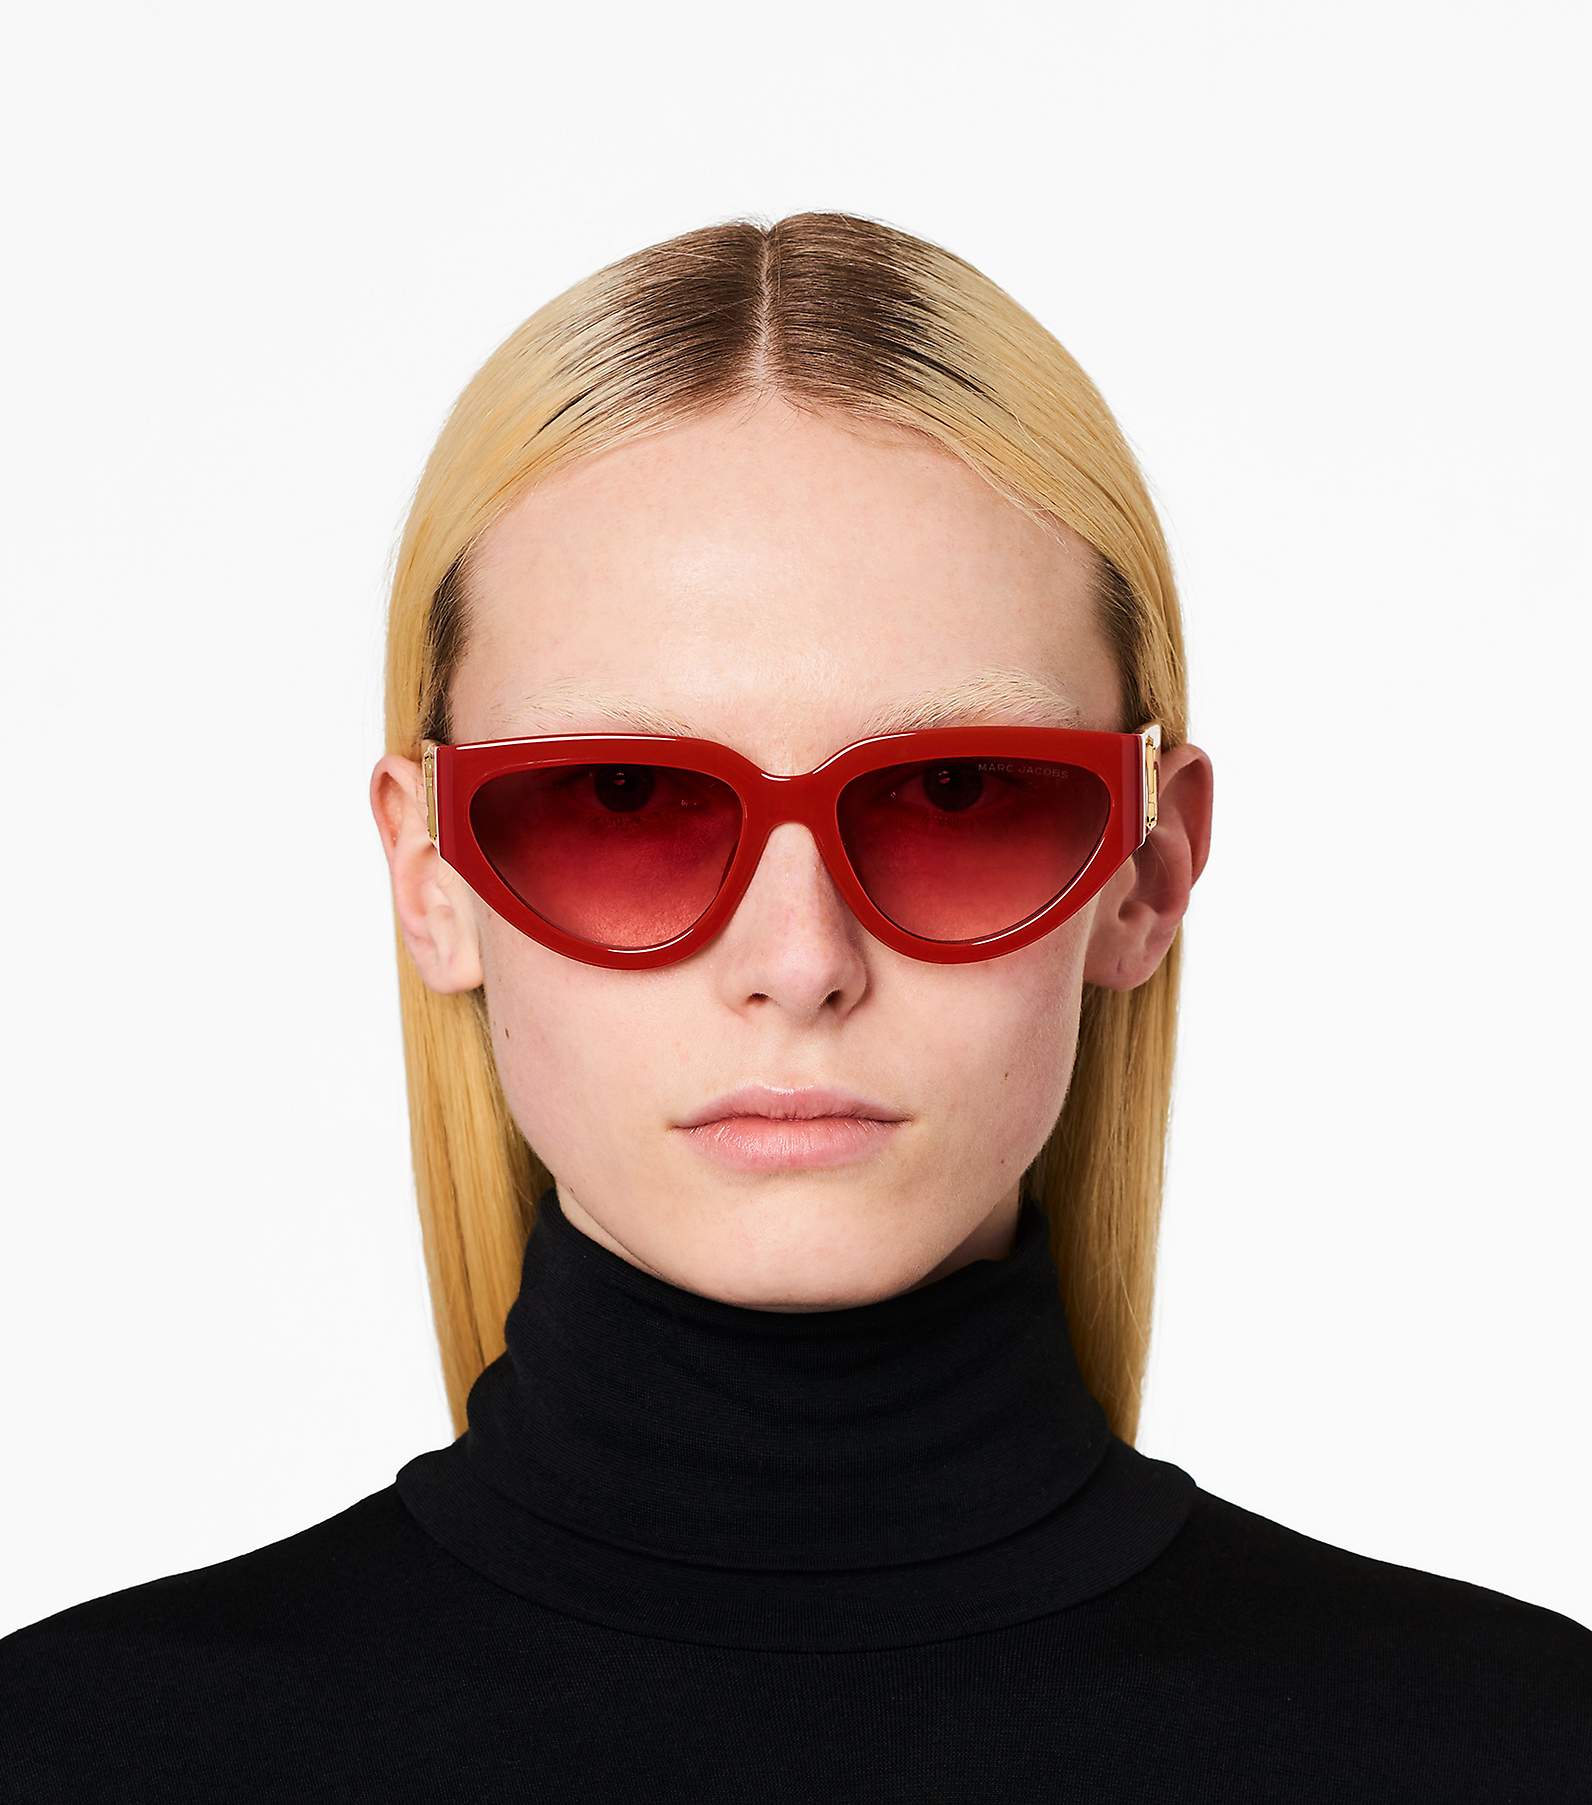 The Marc Jacobs sunglasses are so practical. The chains protects